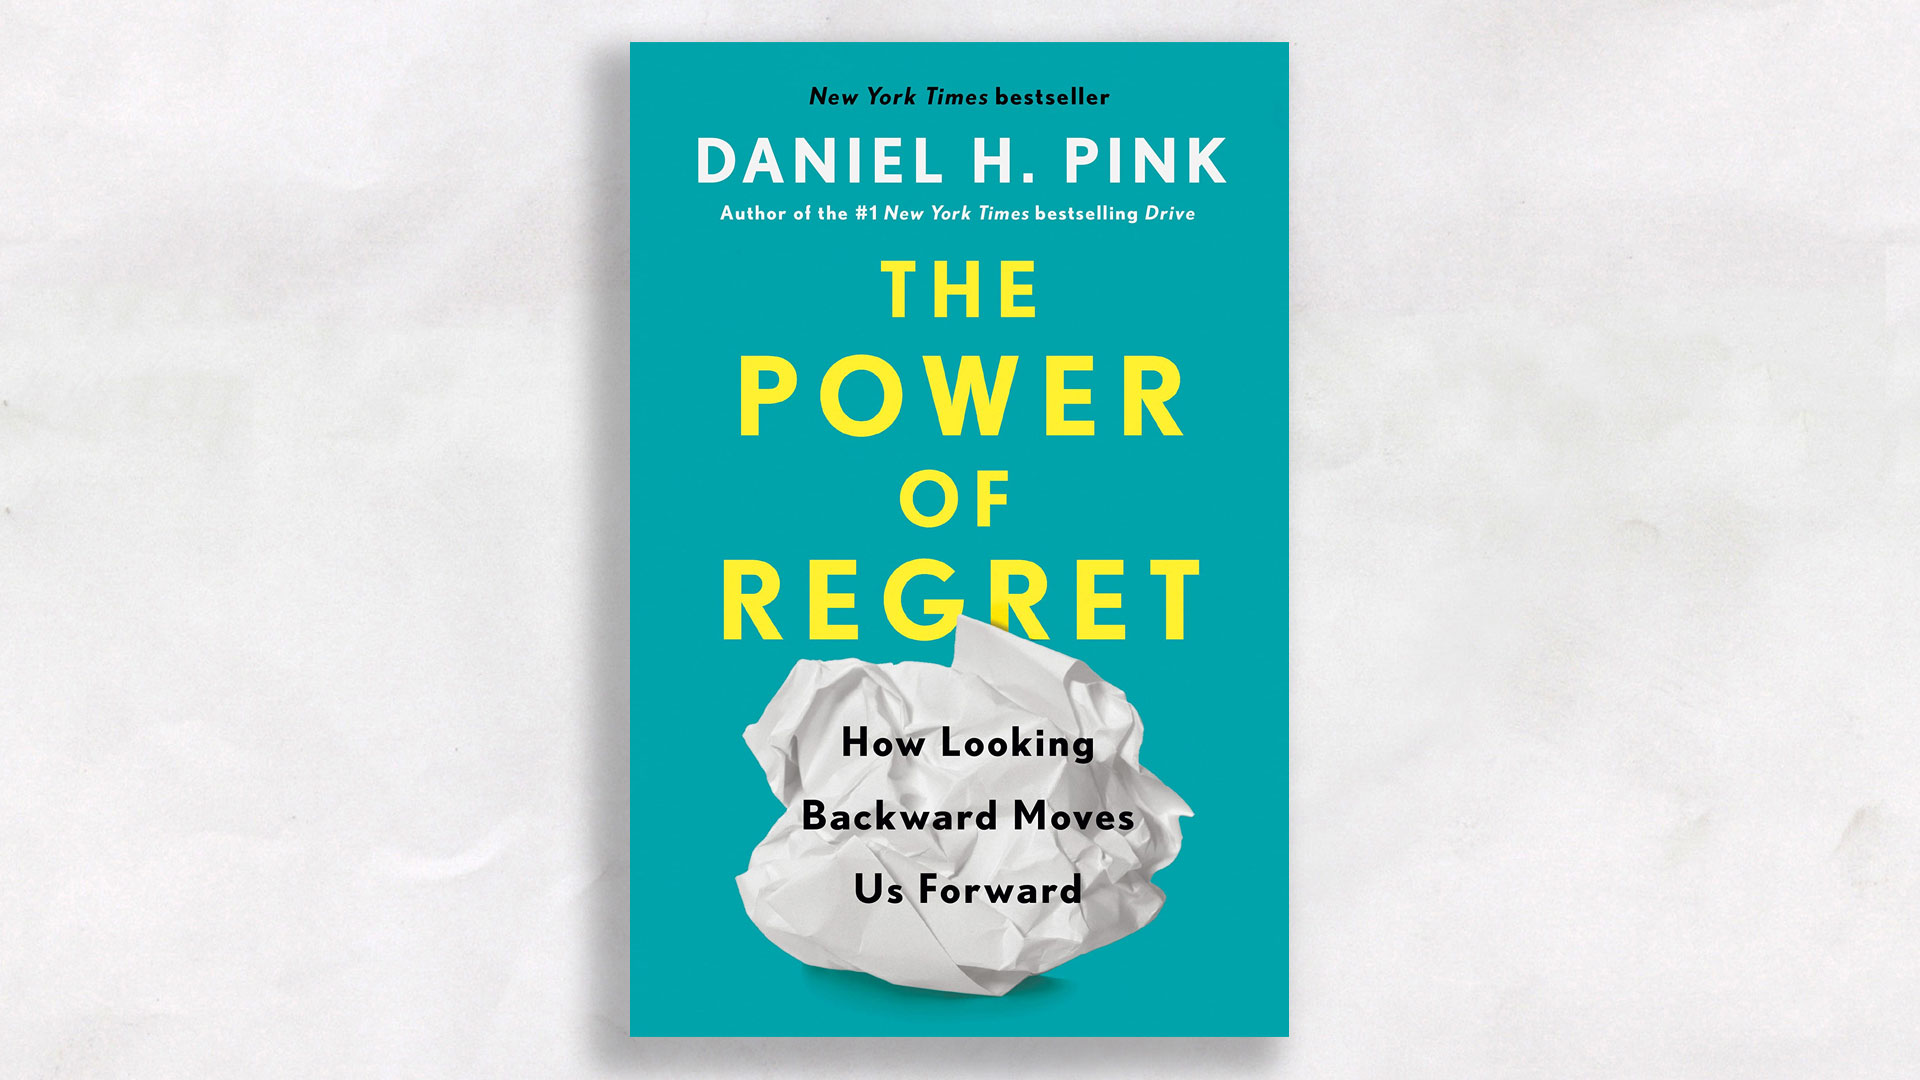 book on crumple white paper background: The Power of Regret by Daniel H. Pink.